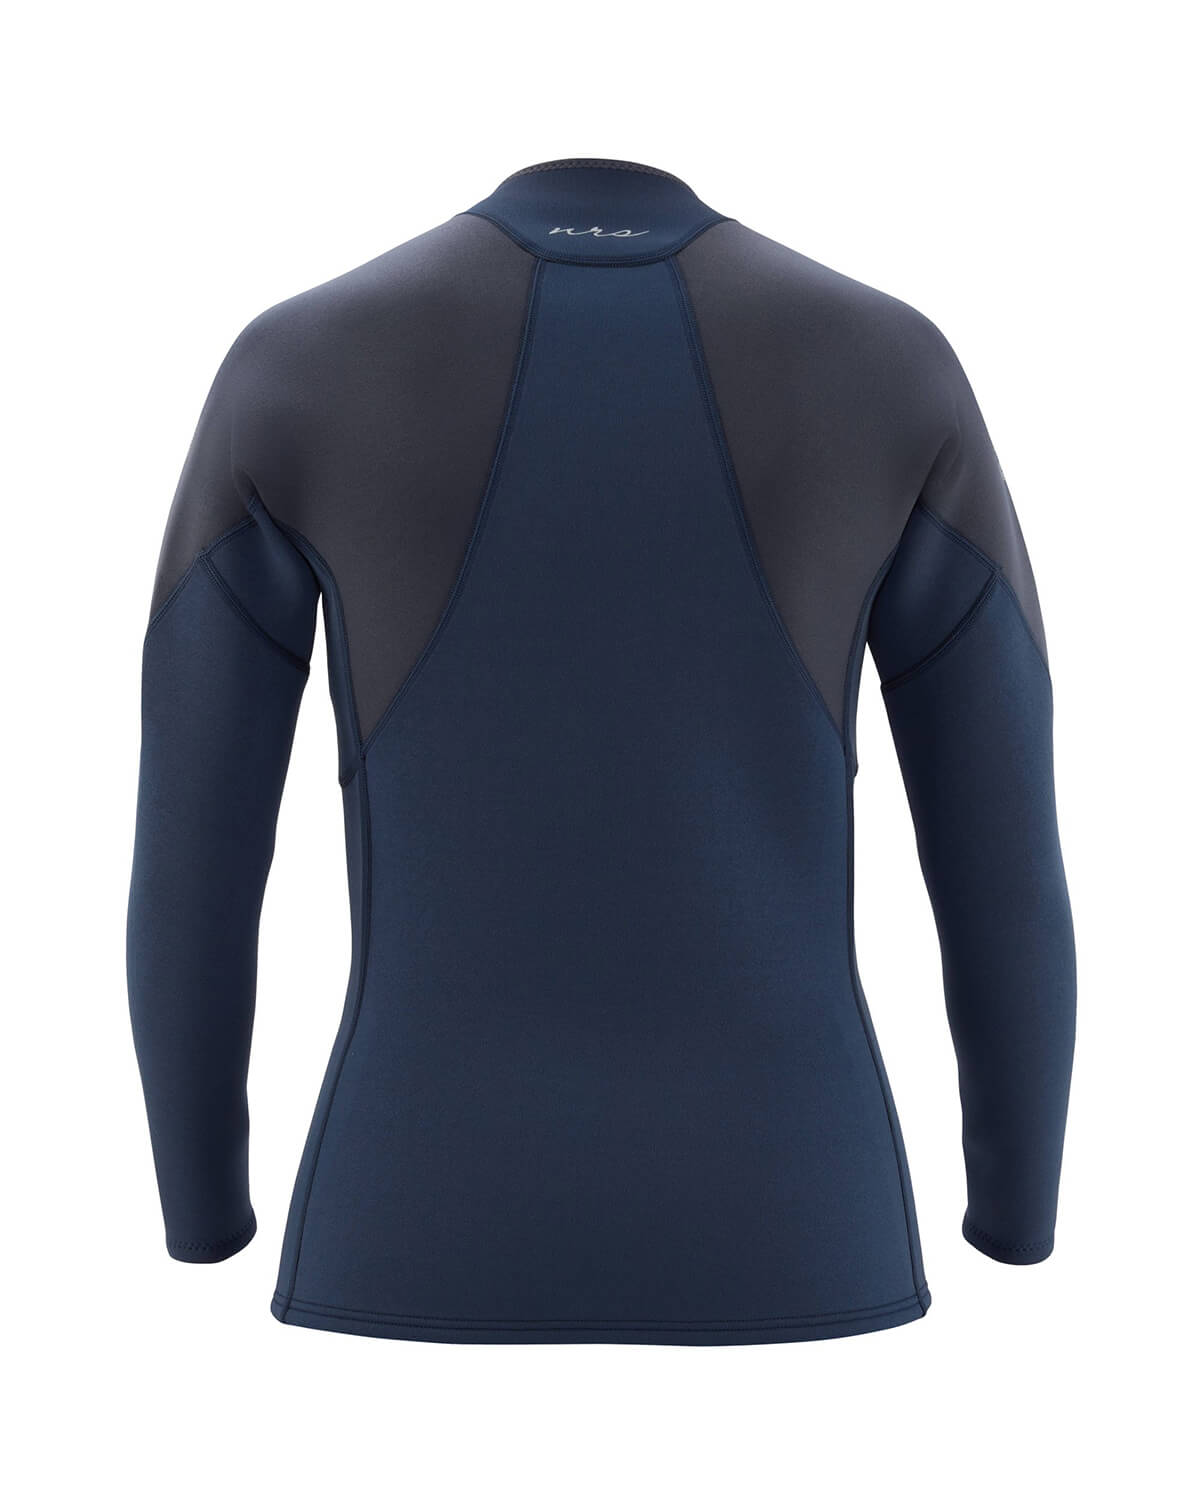 2mm Women's NRS IGNITOR Wetsuit Jacket